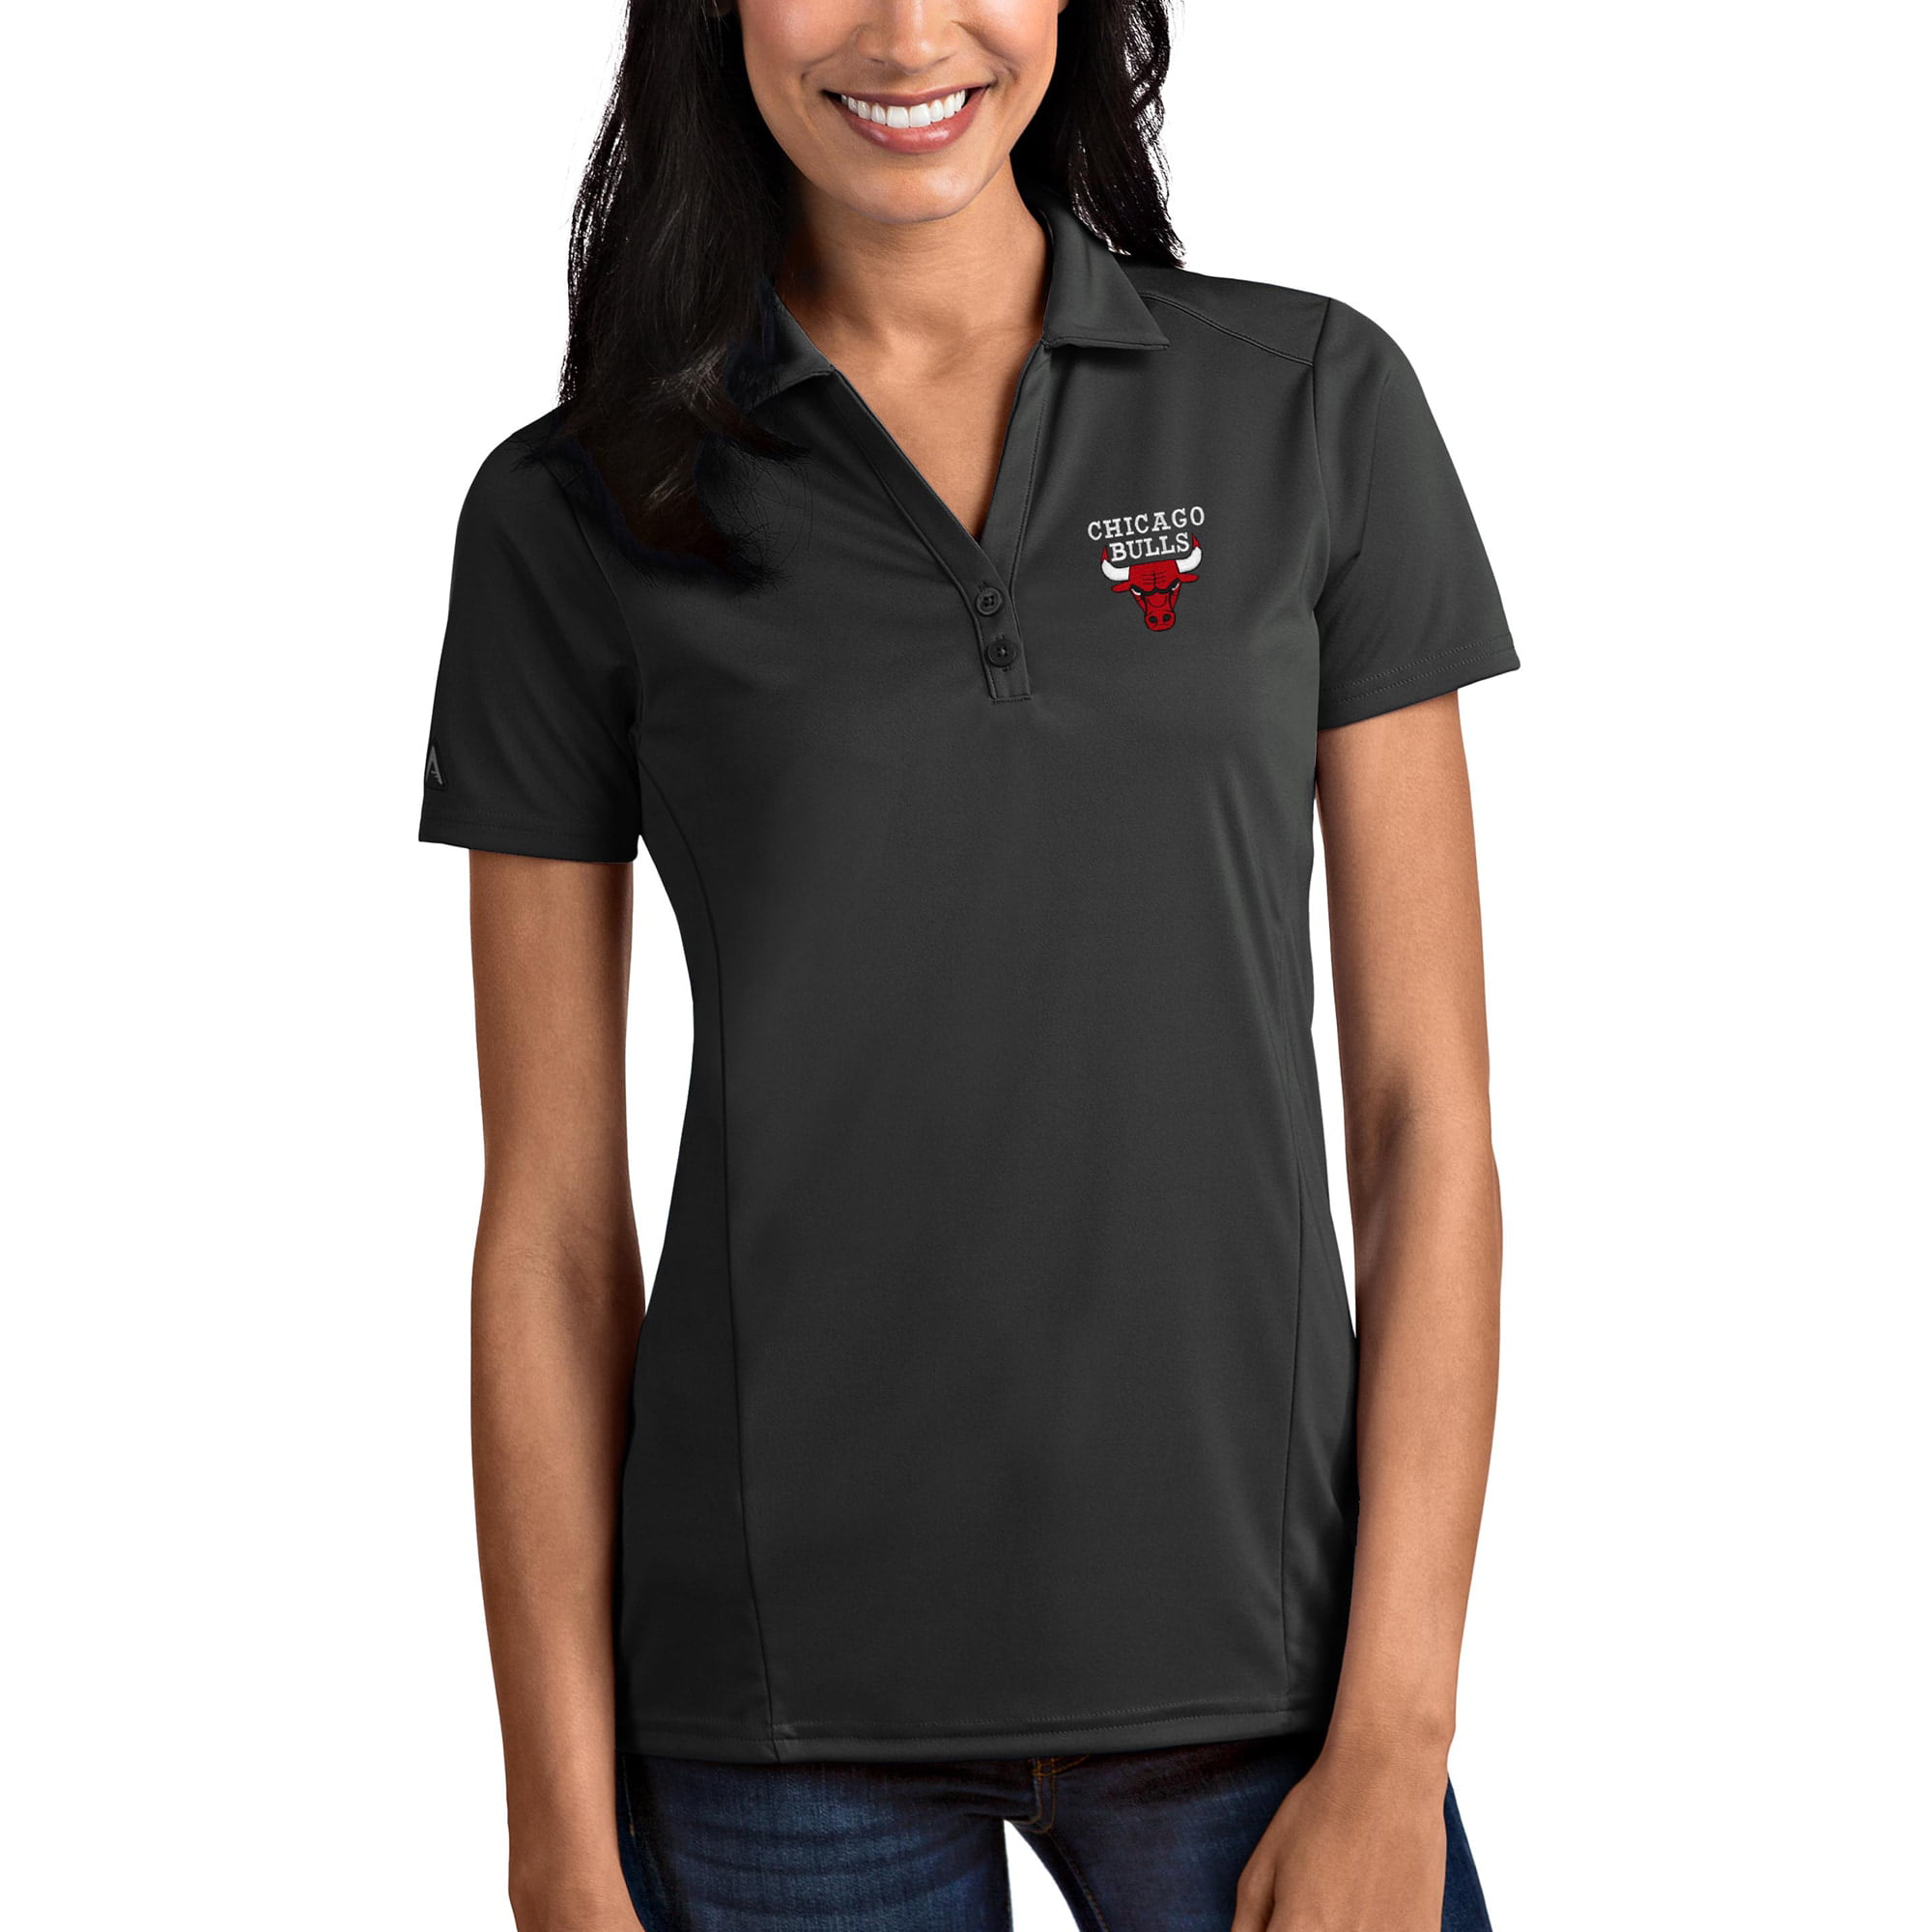 new orleans polo shirt